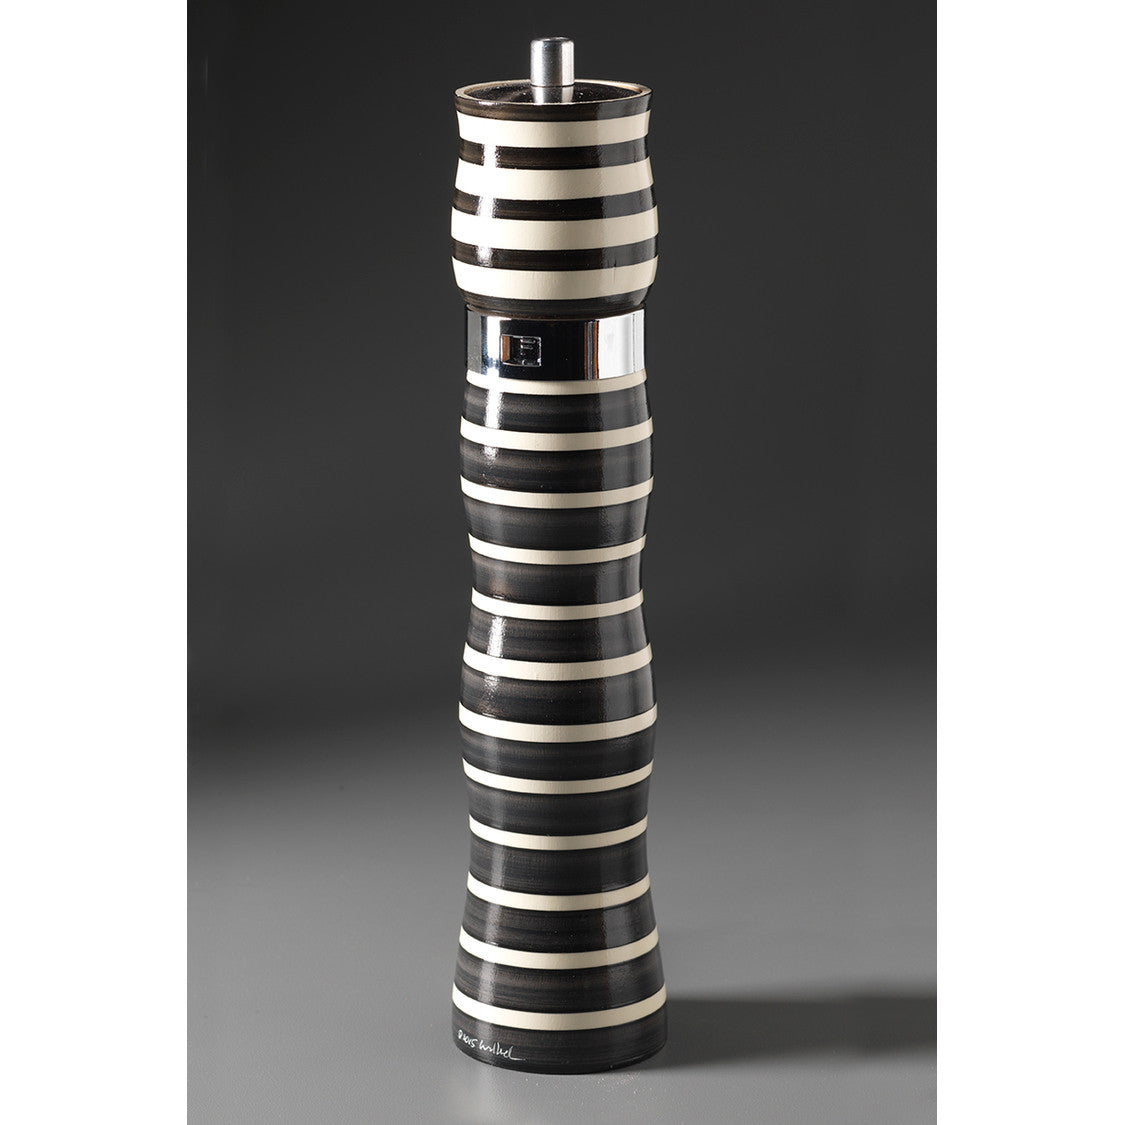 https://www.sweetheartgallery.com/cdn/shop/products/Raw-Design-Black-and-White-Wooden-Salt-Shaker-and-Pepper-Mill-Combo-C-8-Artistic-Designer-Salt-and-Pepper-Shakers.jpeg?v=1590333846